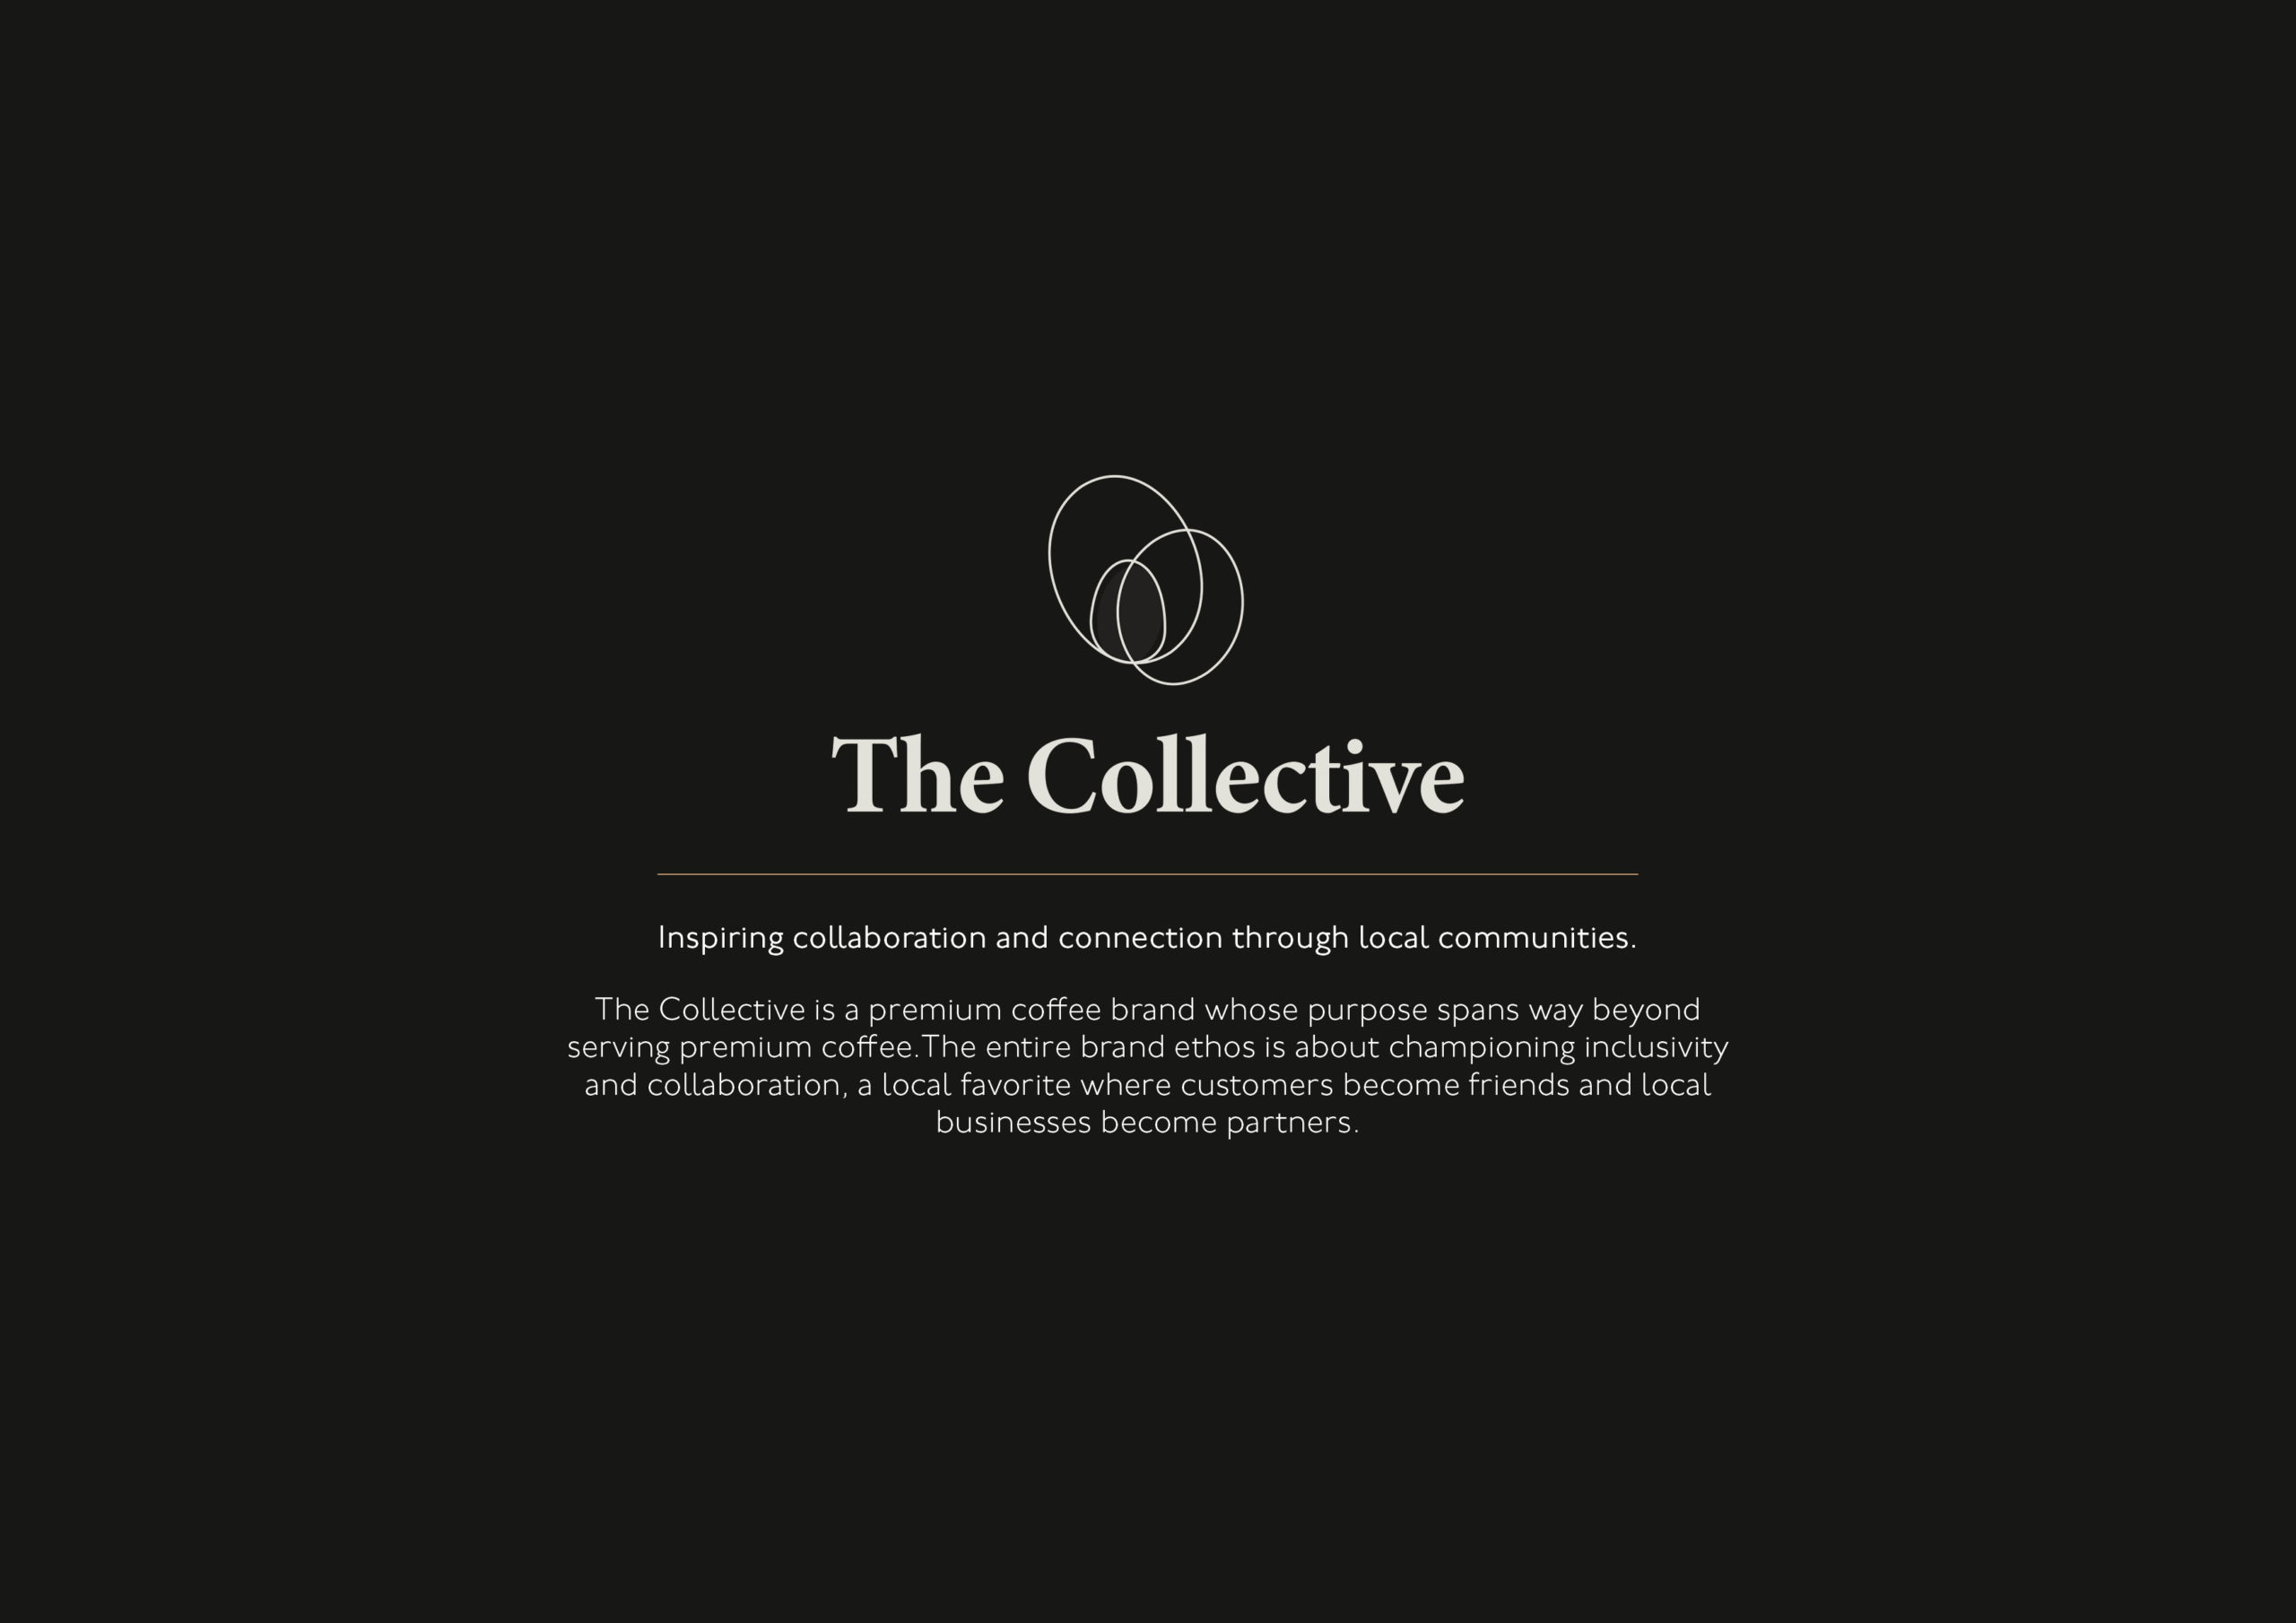 The Collective Coffee Shop - Brand Identity + Brand Positioning Statement